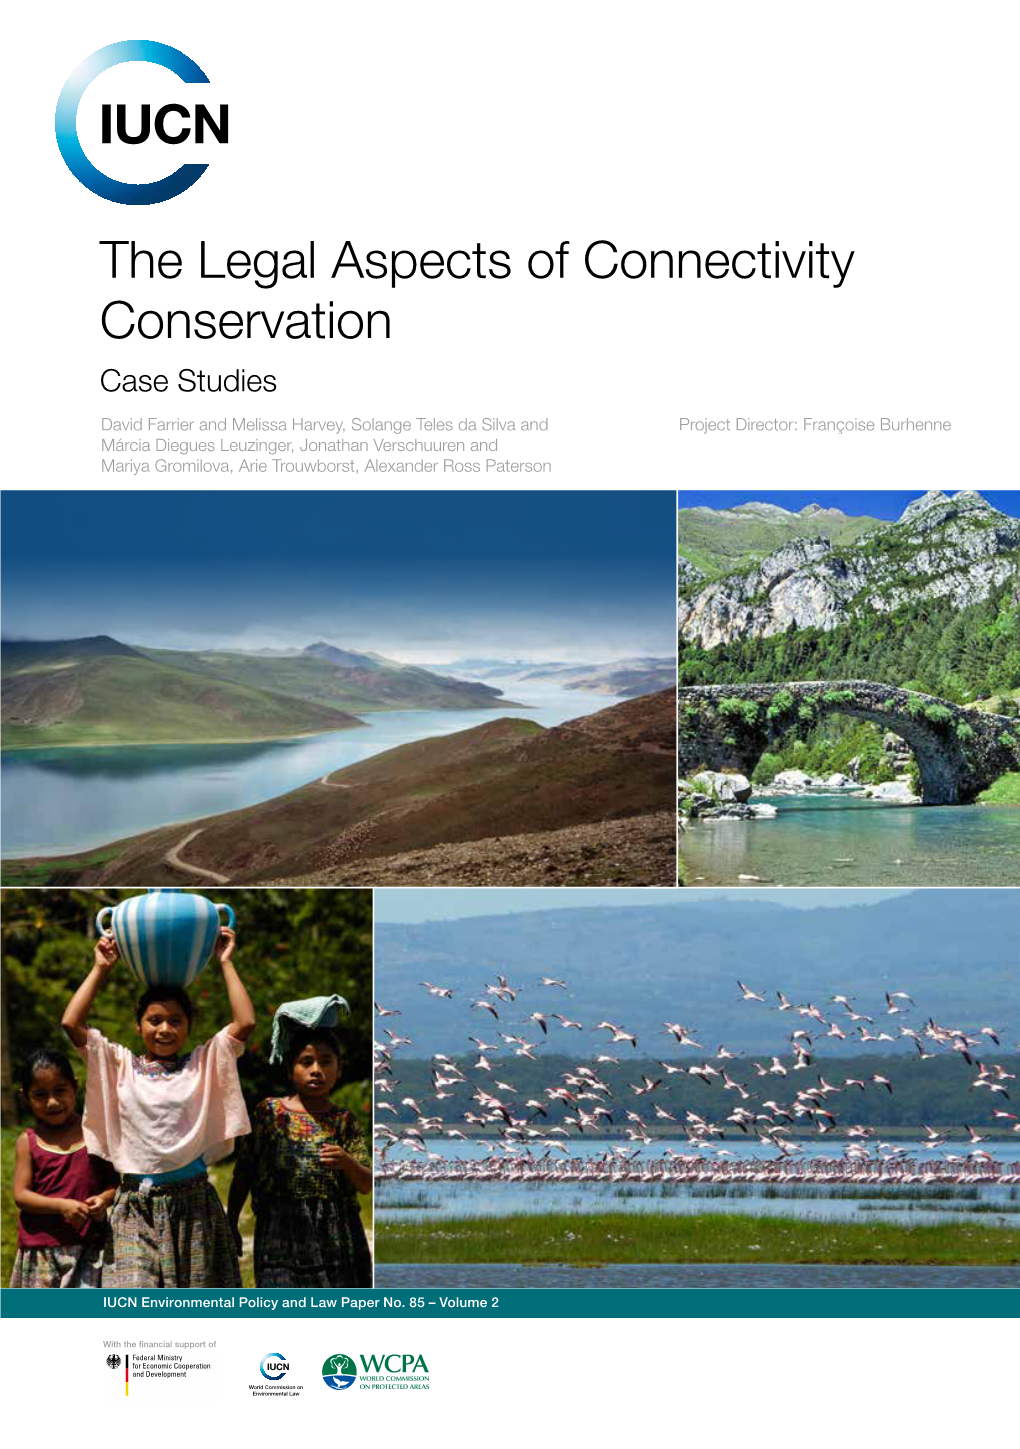 The Legal Aspects of Connectivity Conservation – Case Studies the Legal Aspects of Connectivity Conservation Case Studies